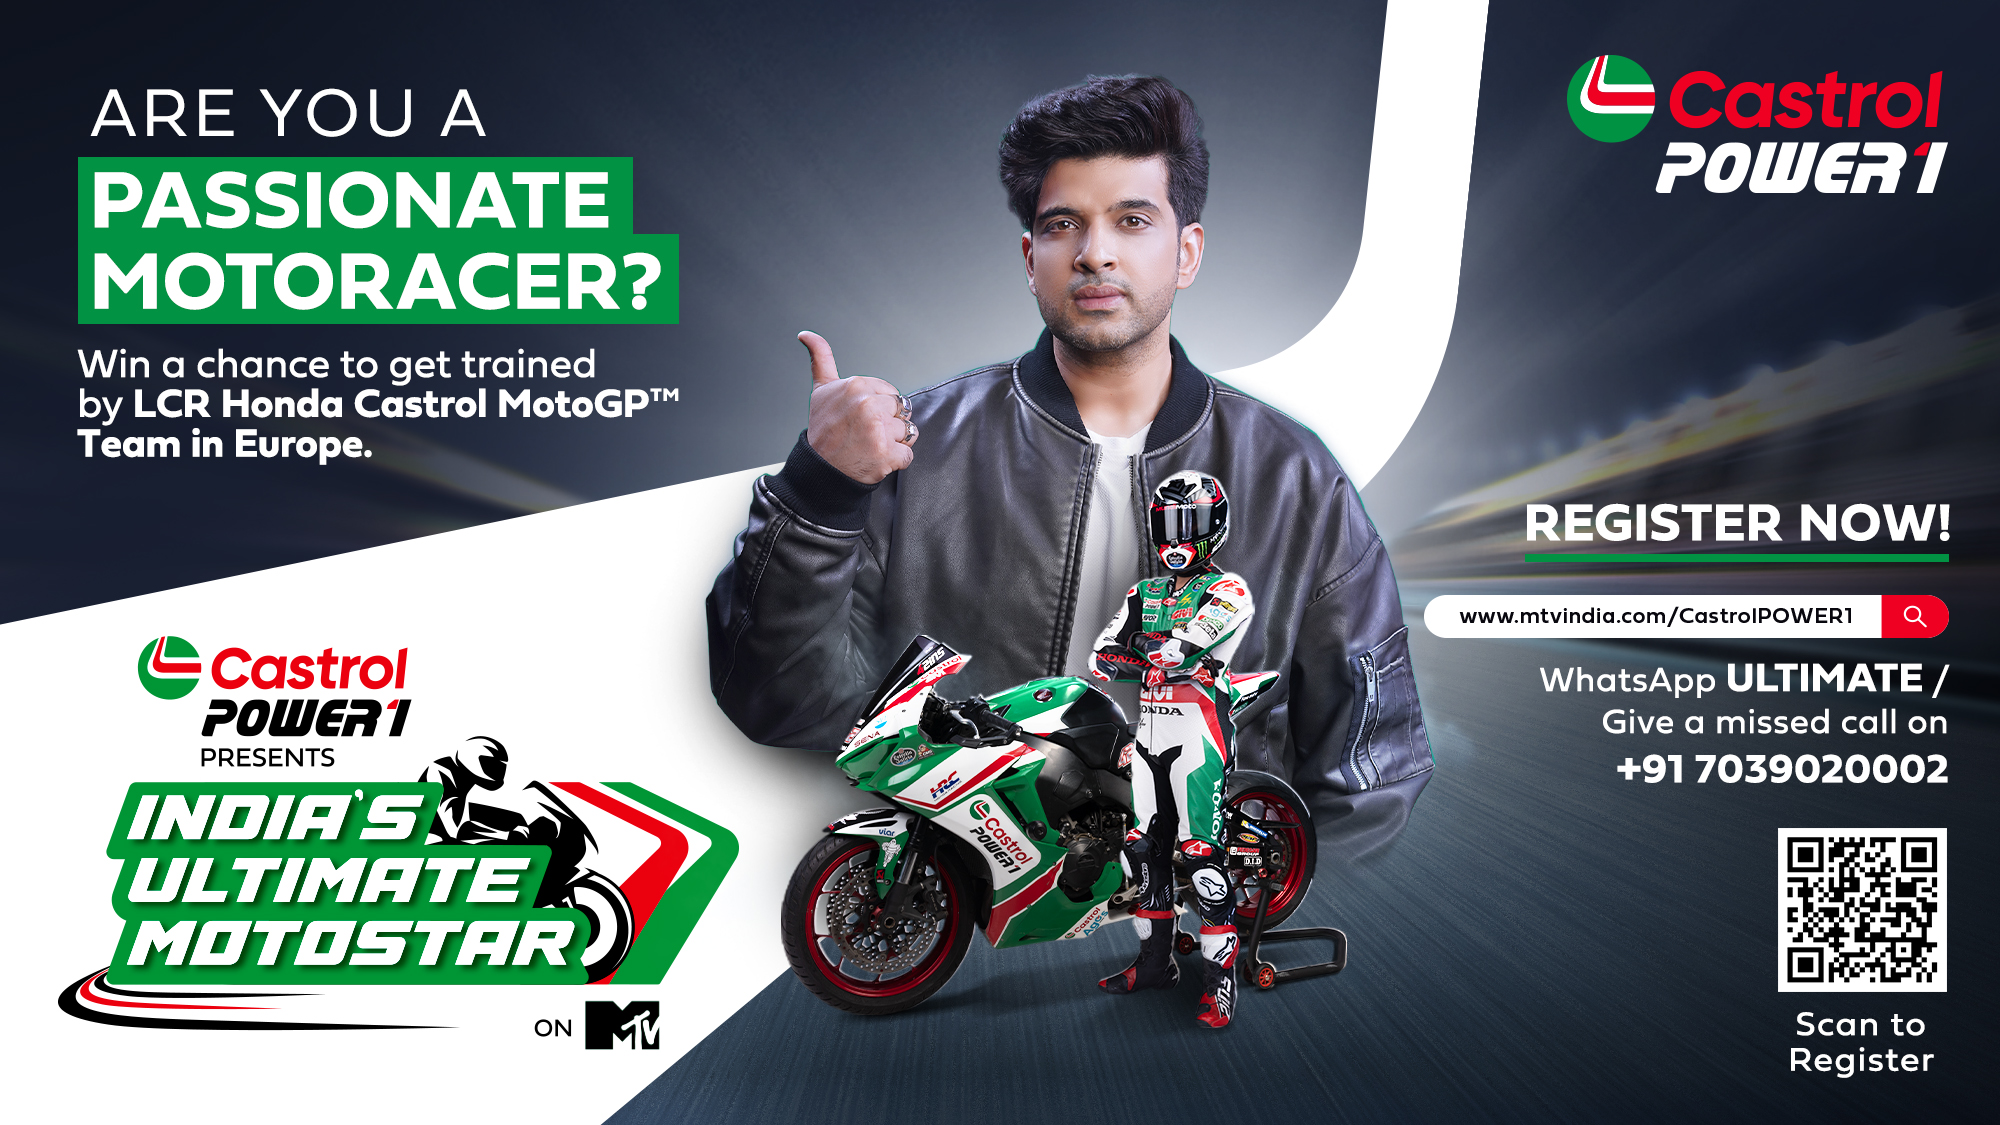 India’s ULTIMATE Motostar on MTV Launched With Several Collabrations